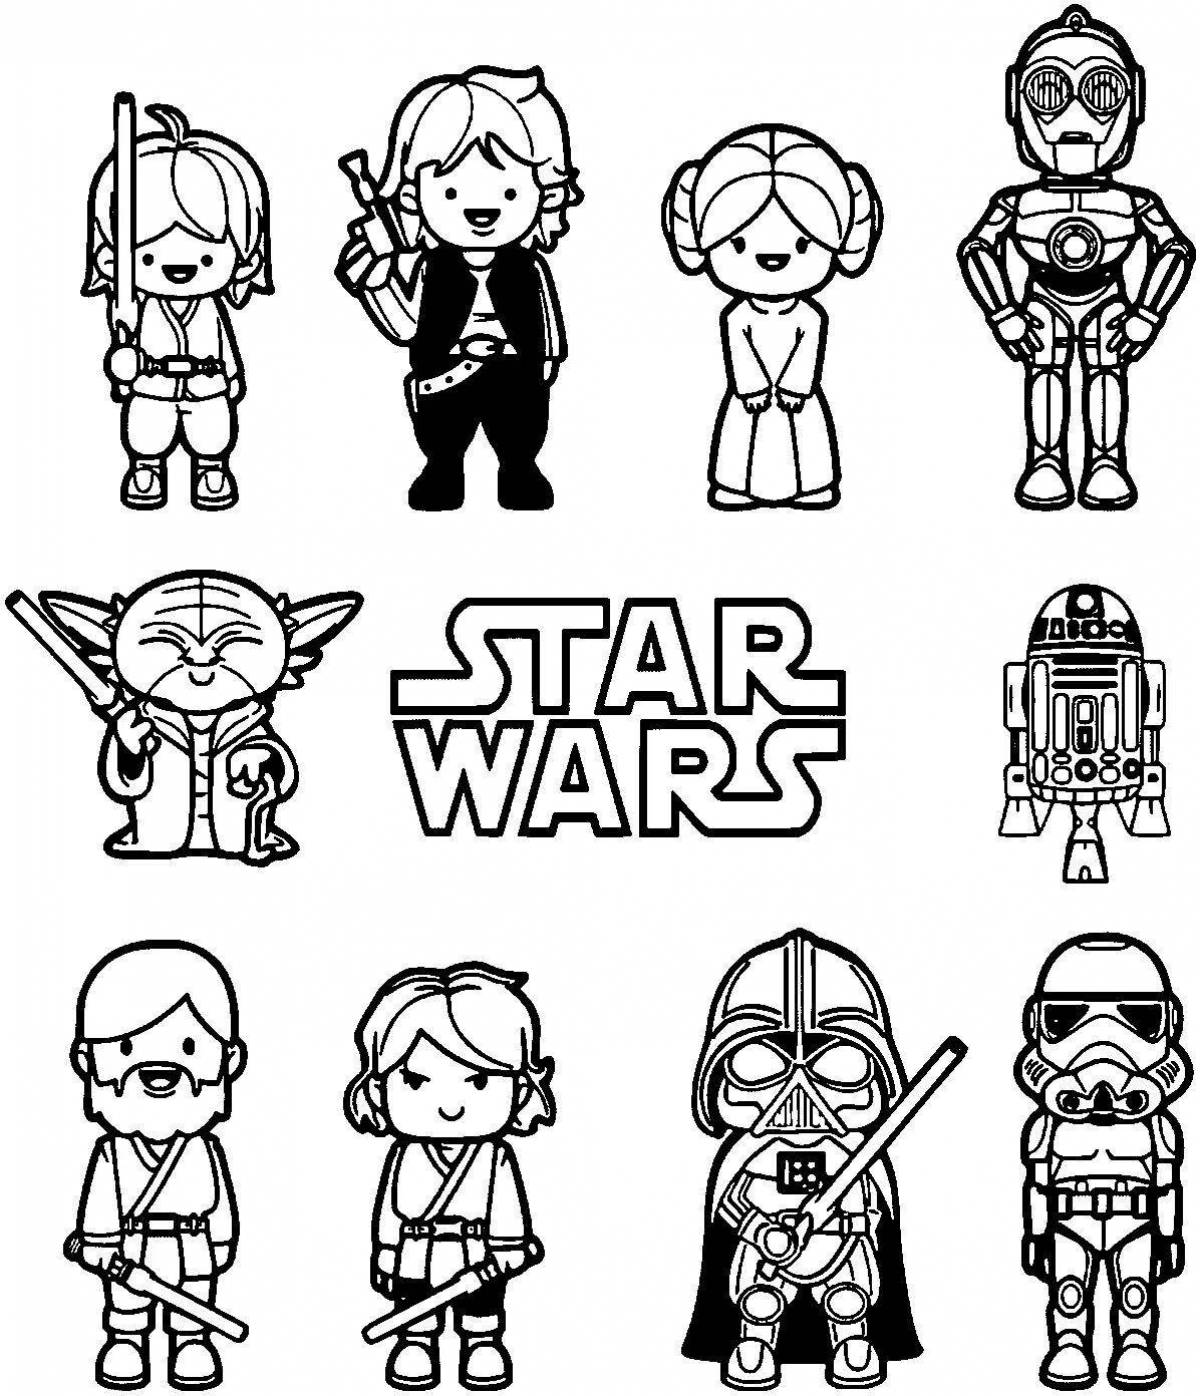 Star Wars coloring book for kids